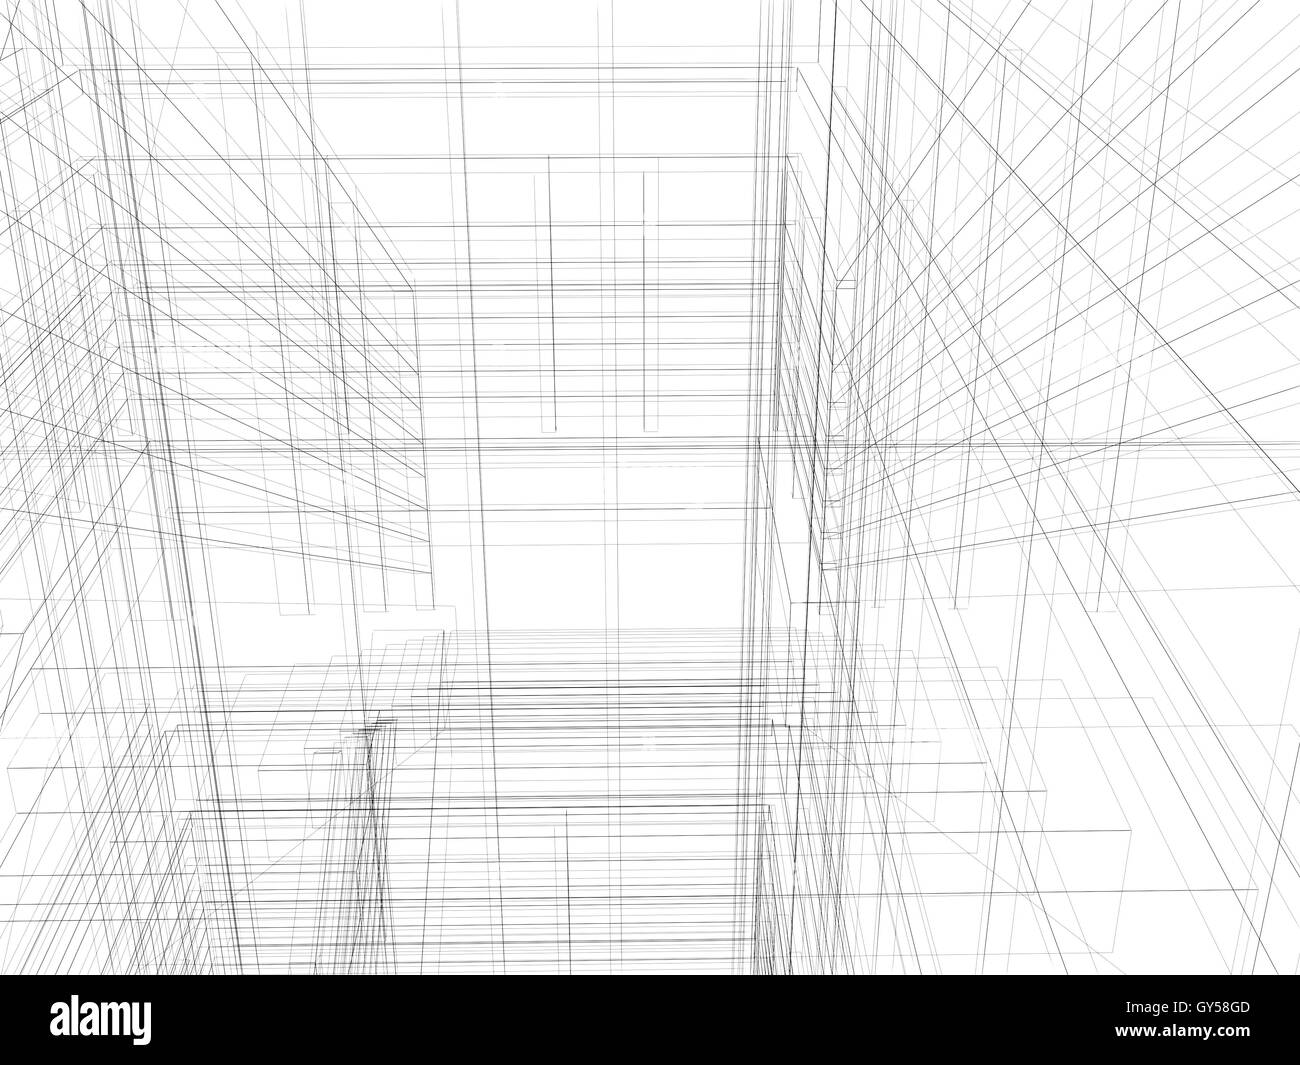 Abstract archticture Stock Photo